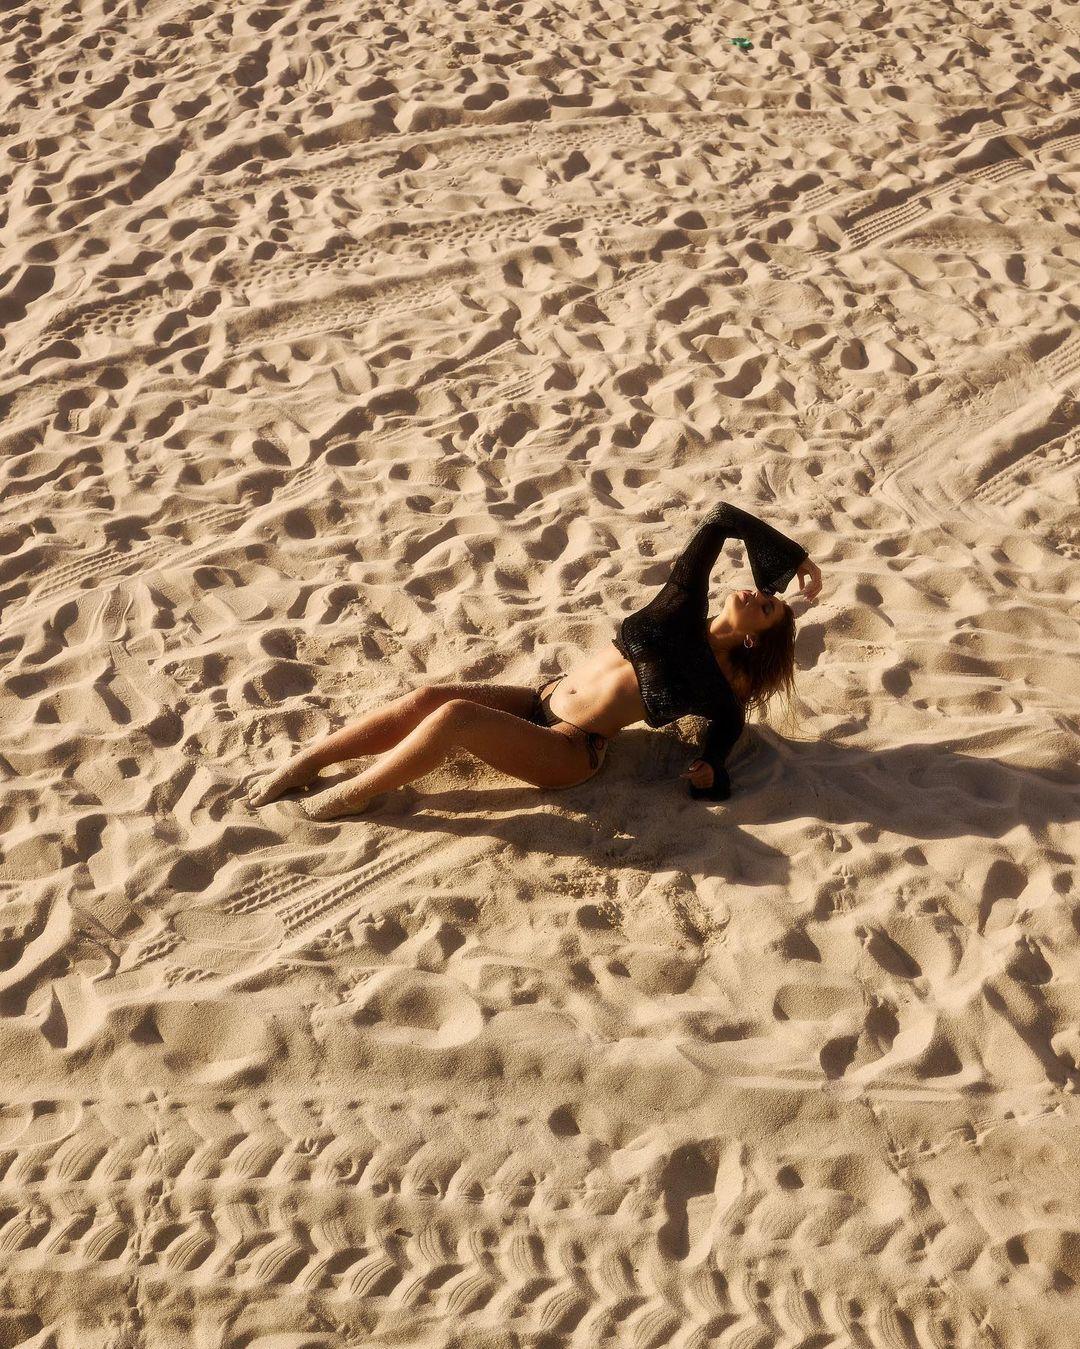 Andreea Dragoi lounging on the sand.